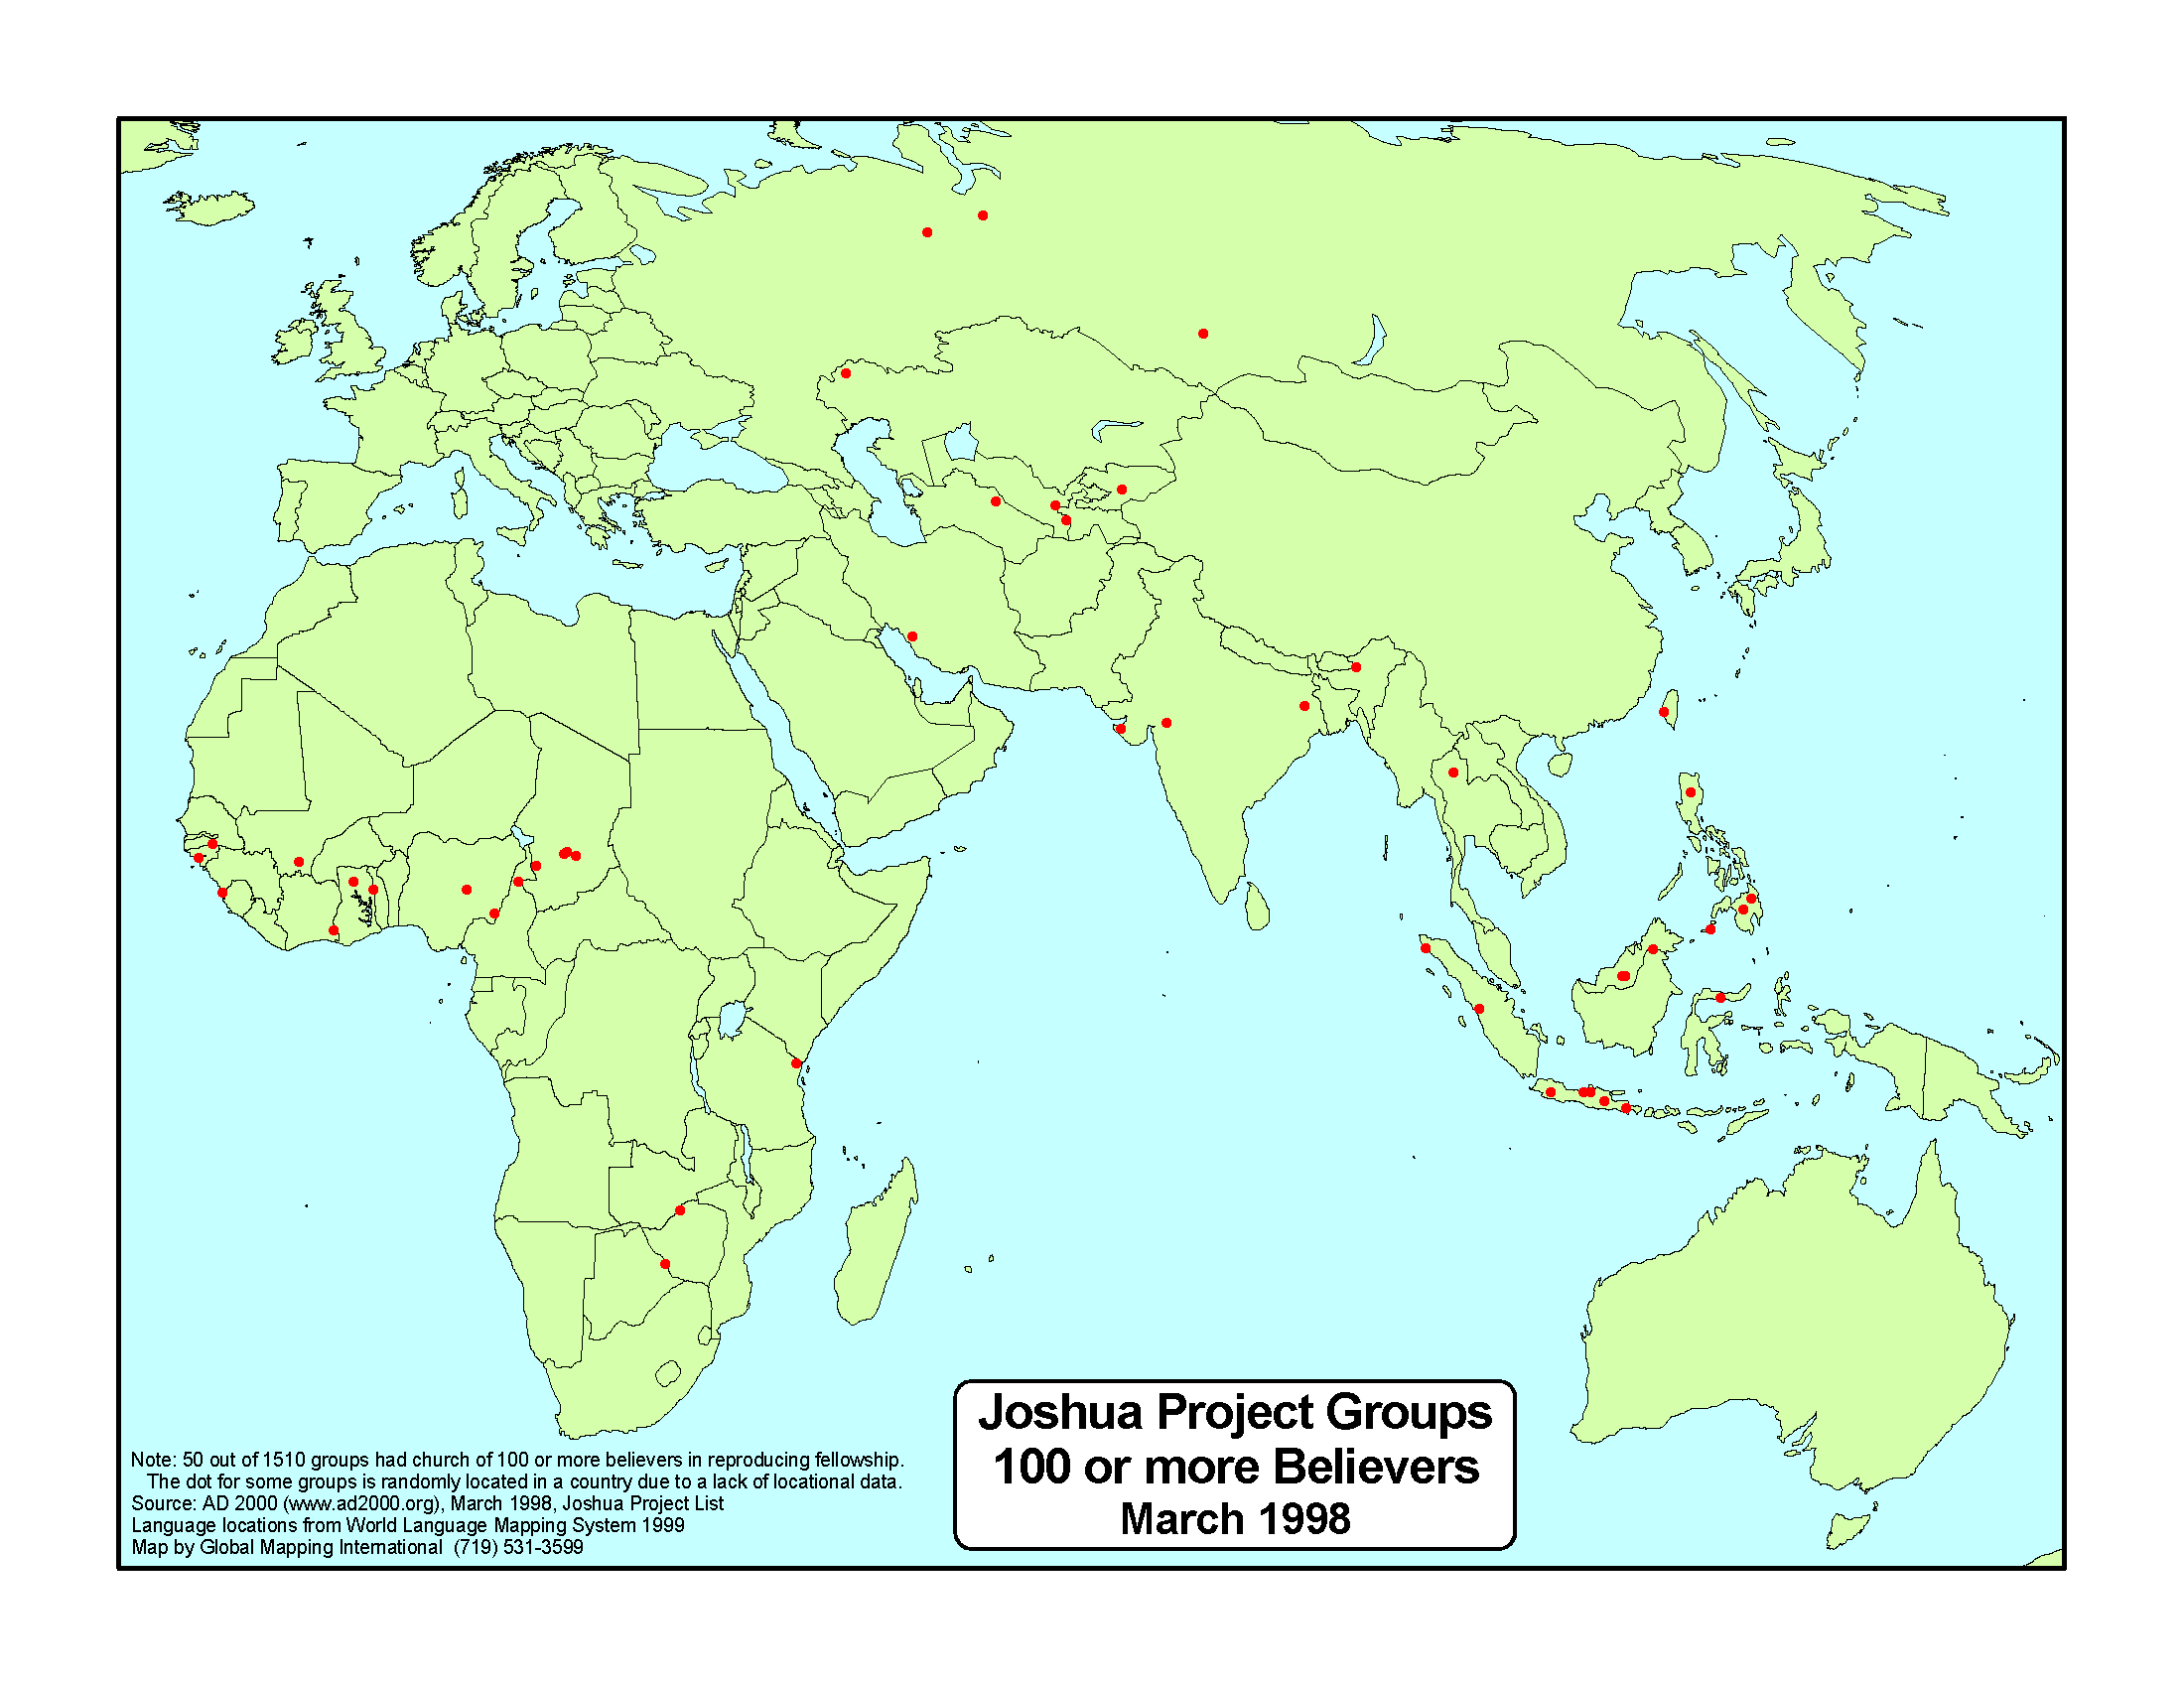 Joshua Project Groups with 100 or more Believers March 1998